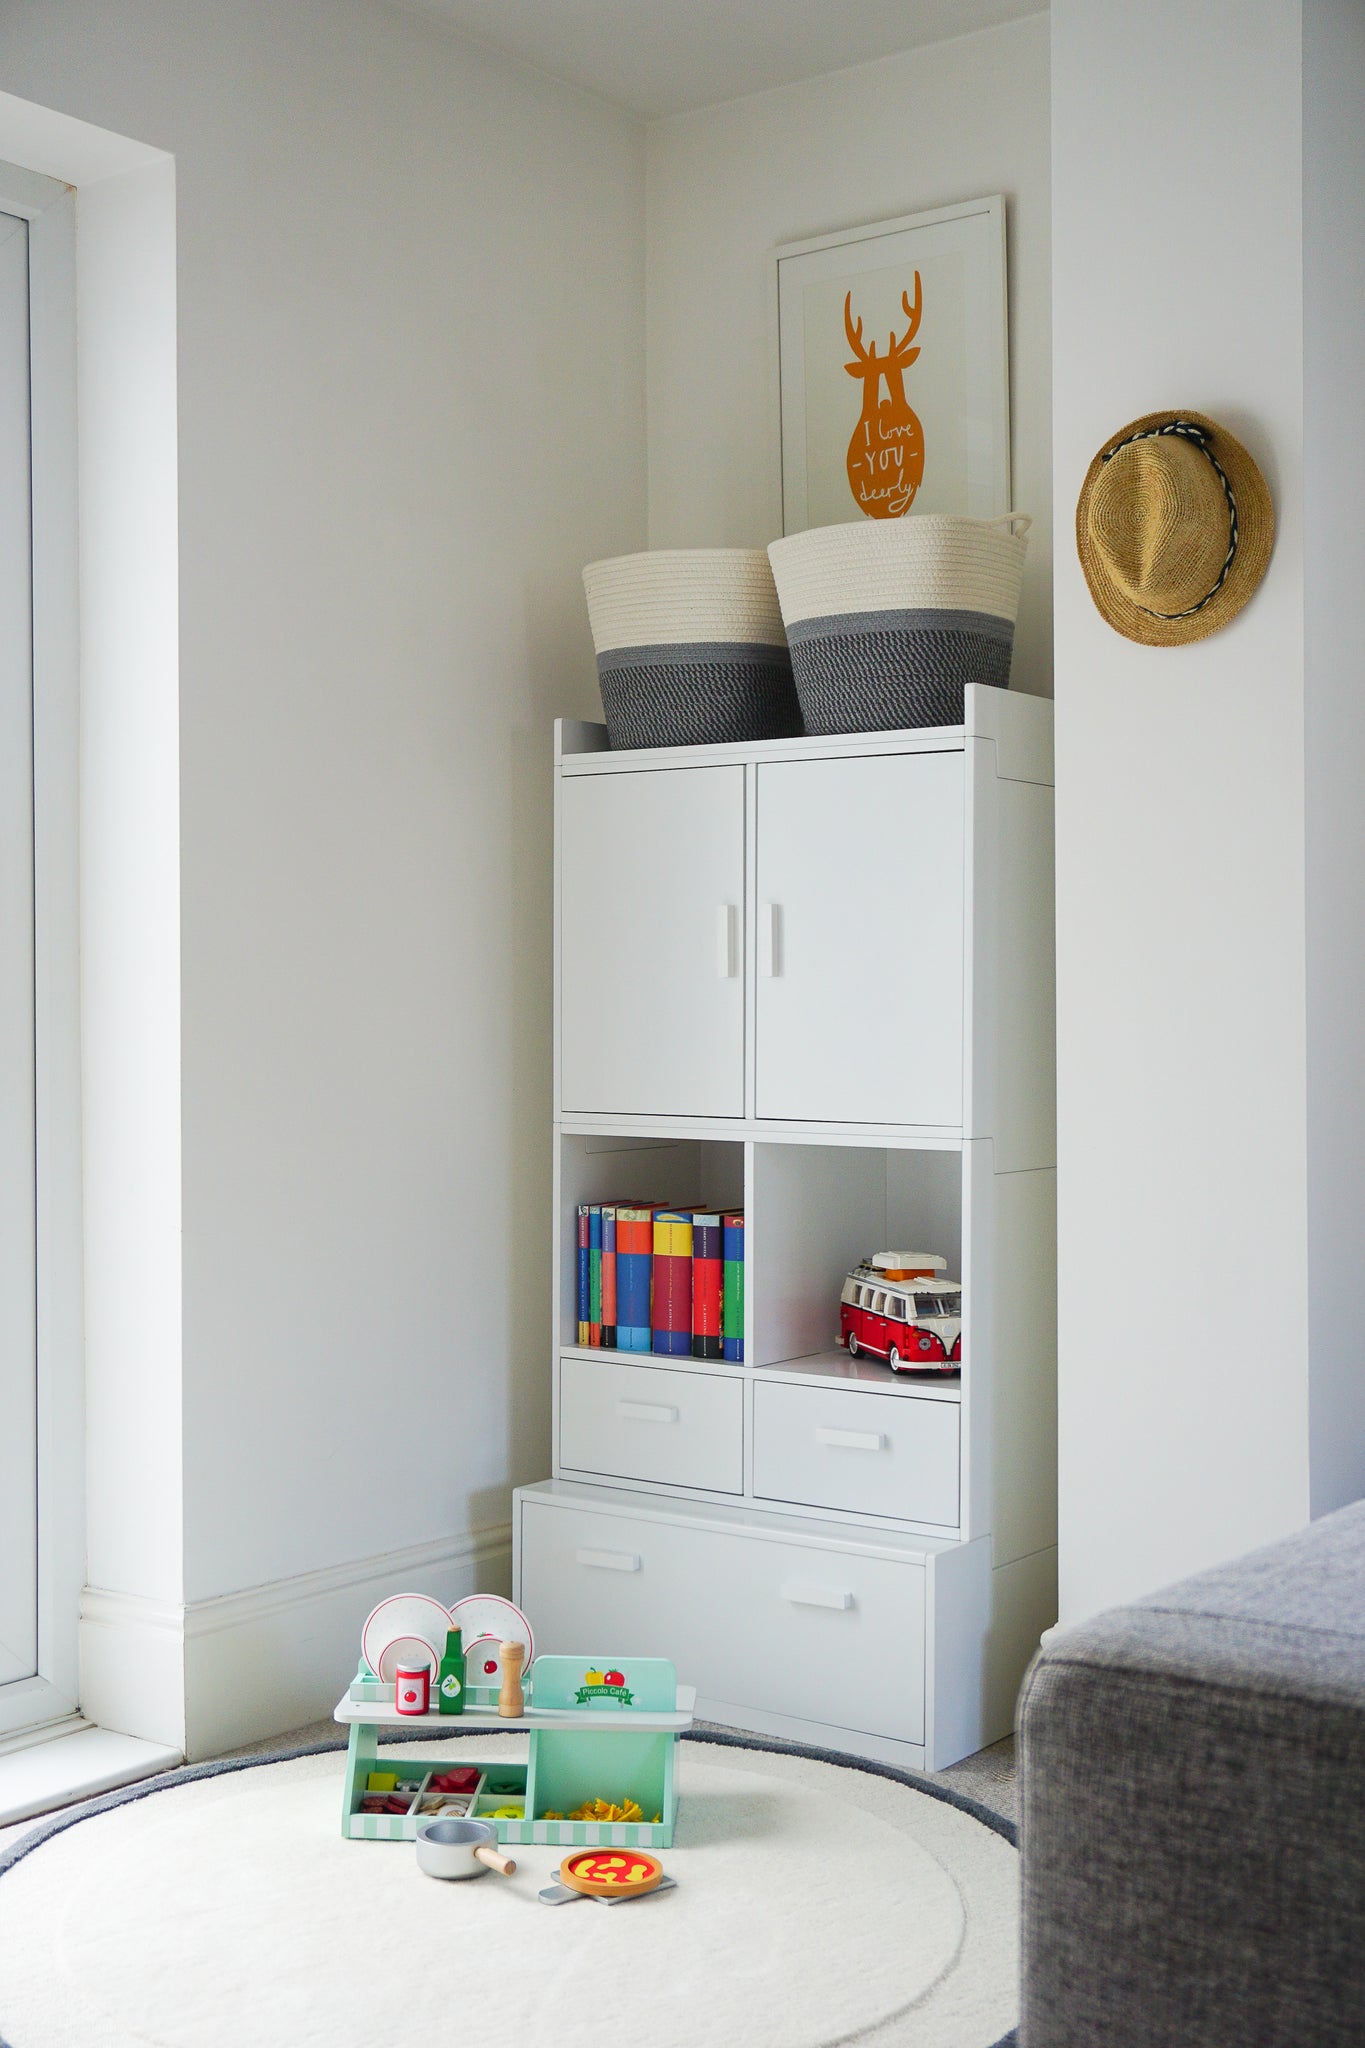 TURN YOUR LIVING ROOM INTO A SHARED SPACE WITH VERSATILE TOY STORAGE Great Little Trading Co